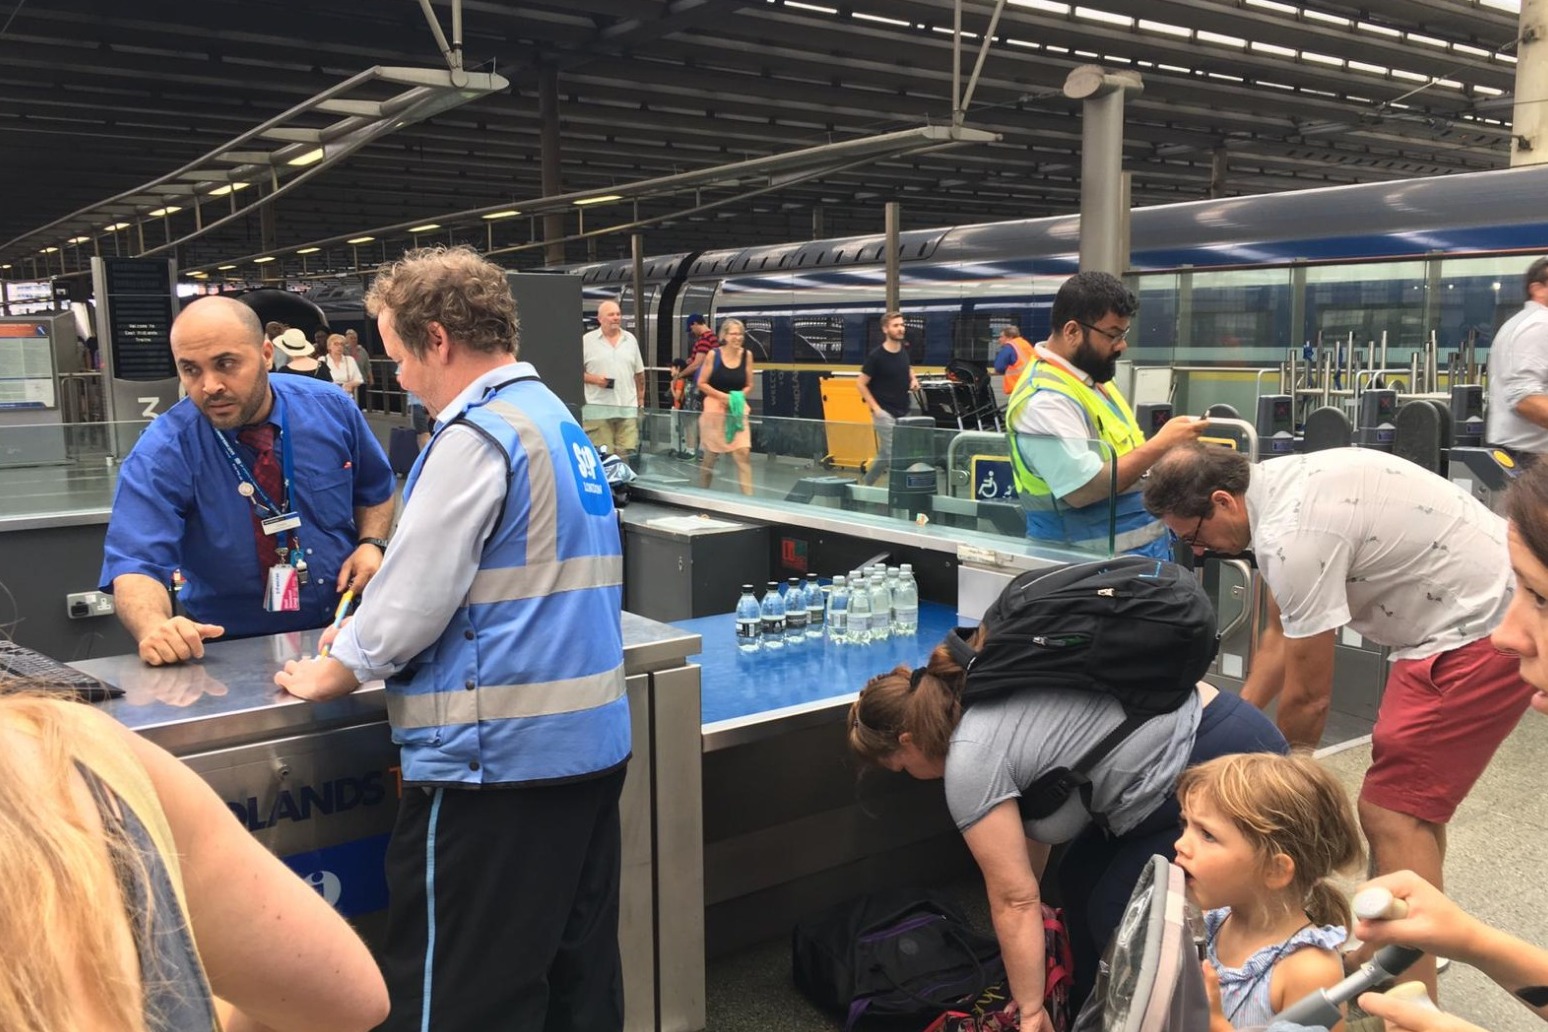 Major delays on the trains and in the air 